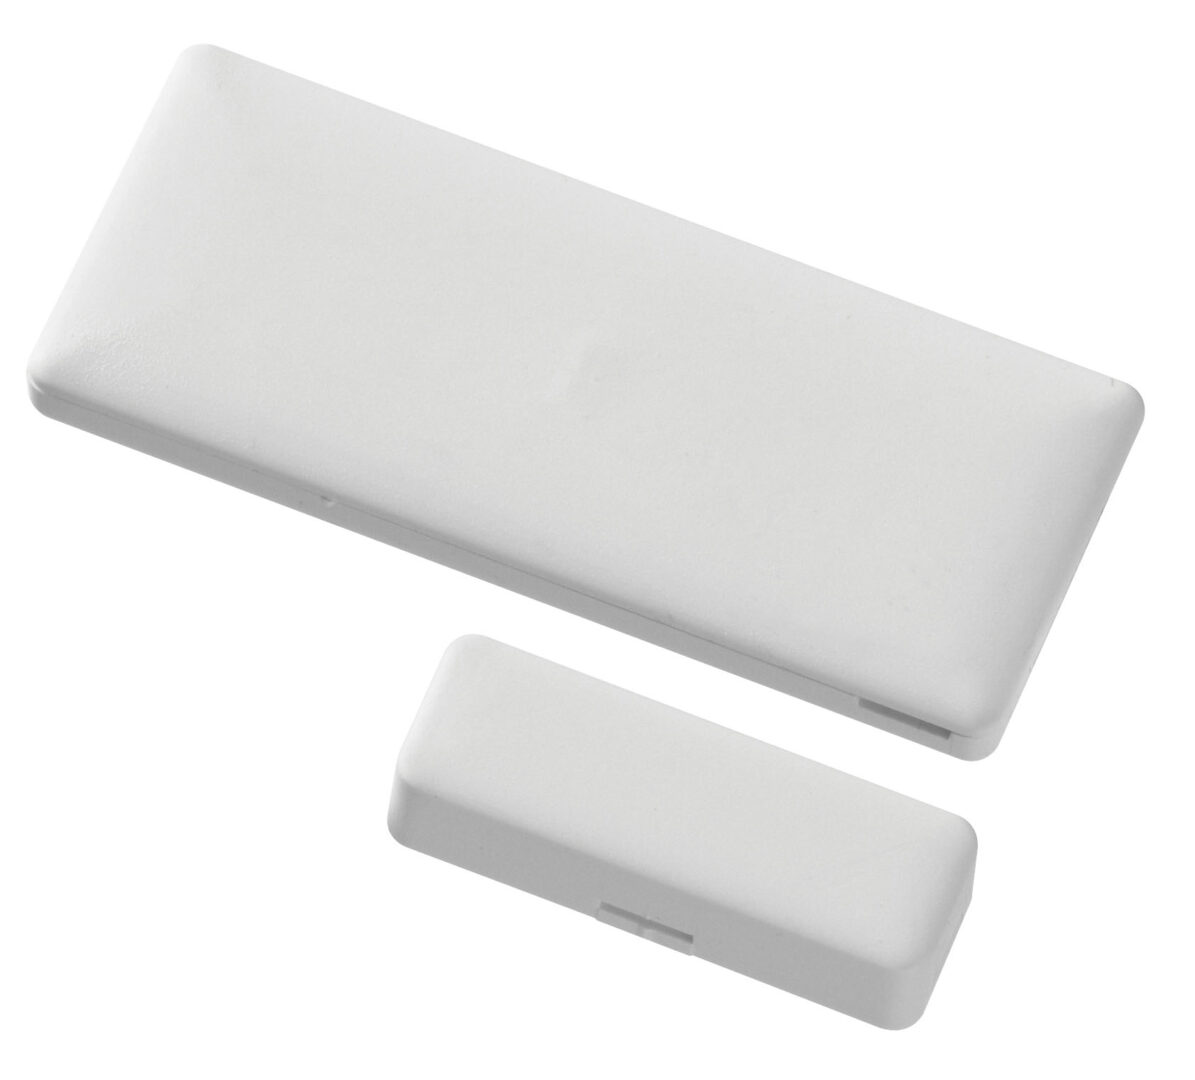 A white door and window contact set.